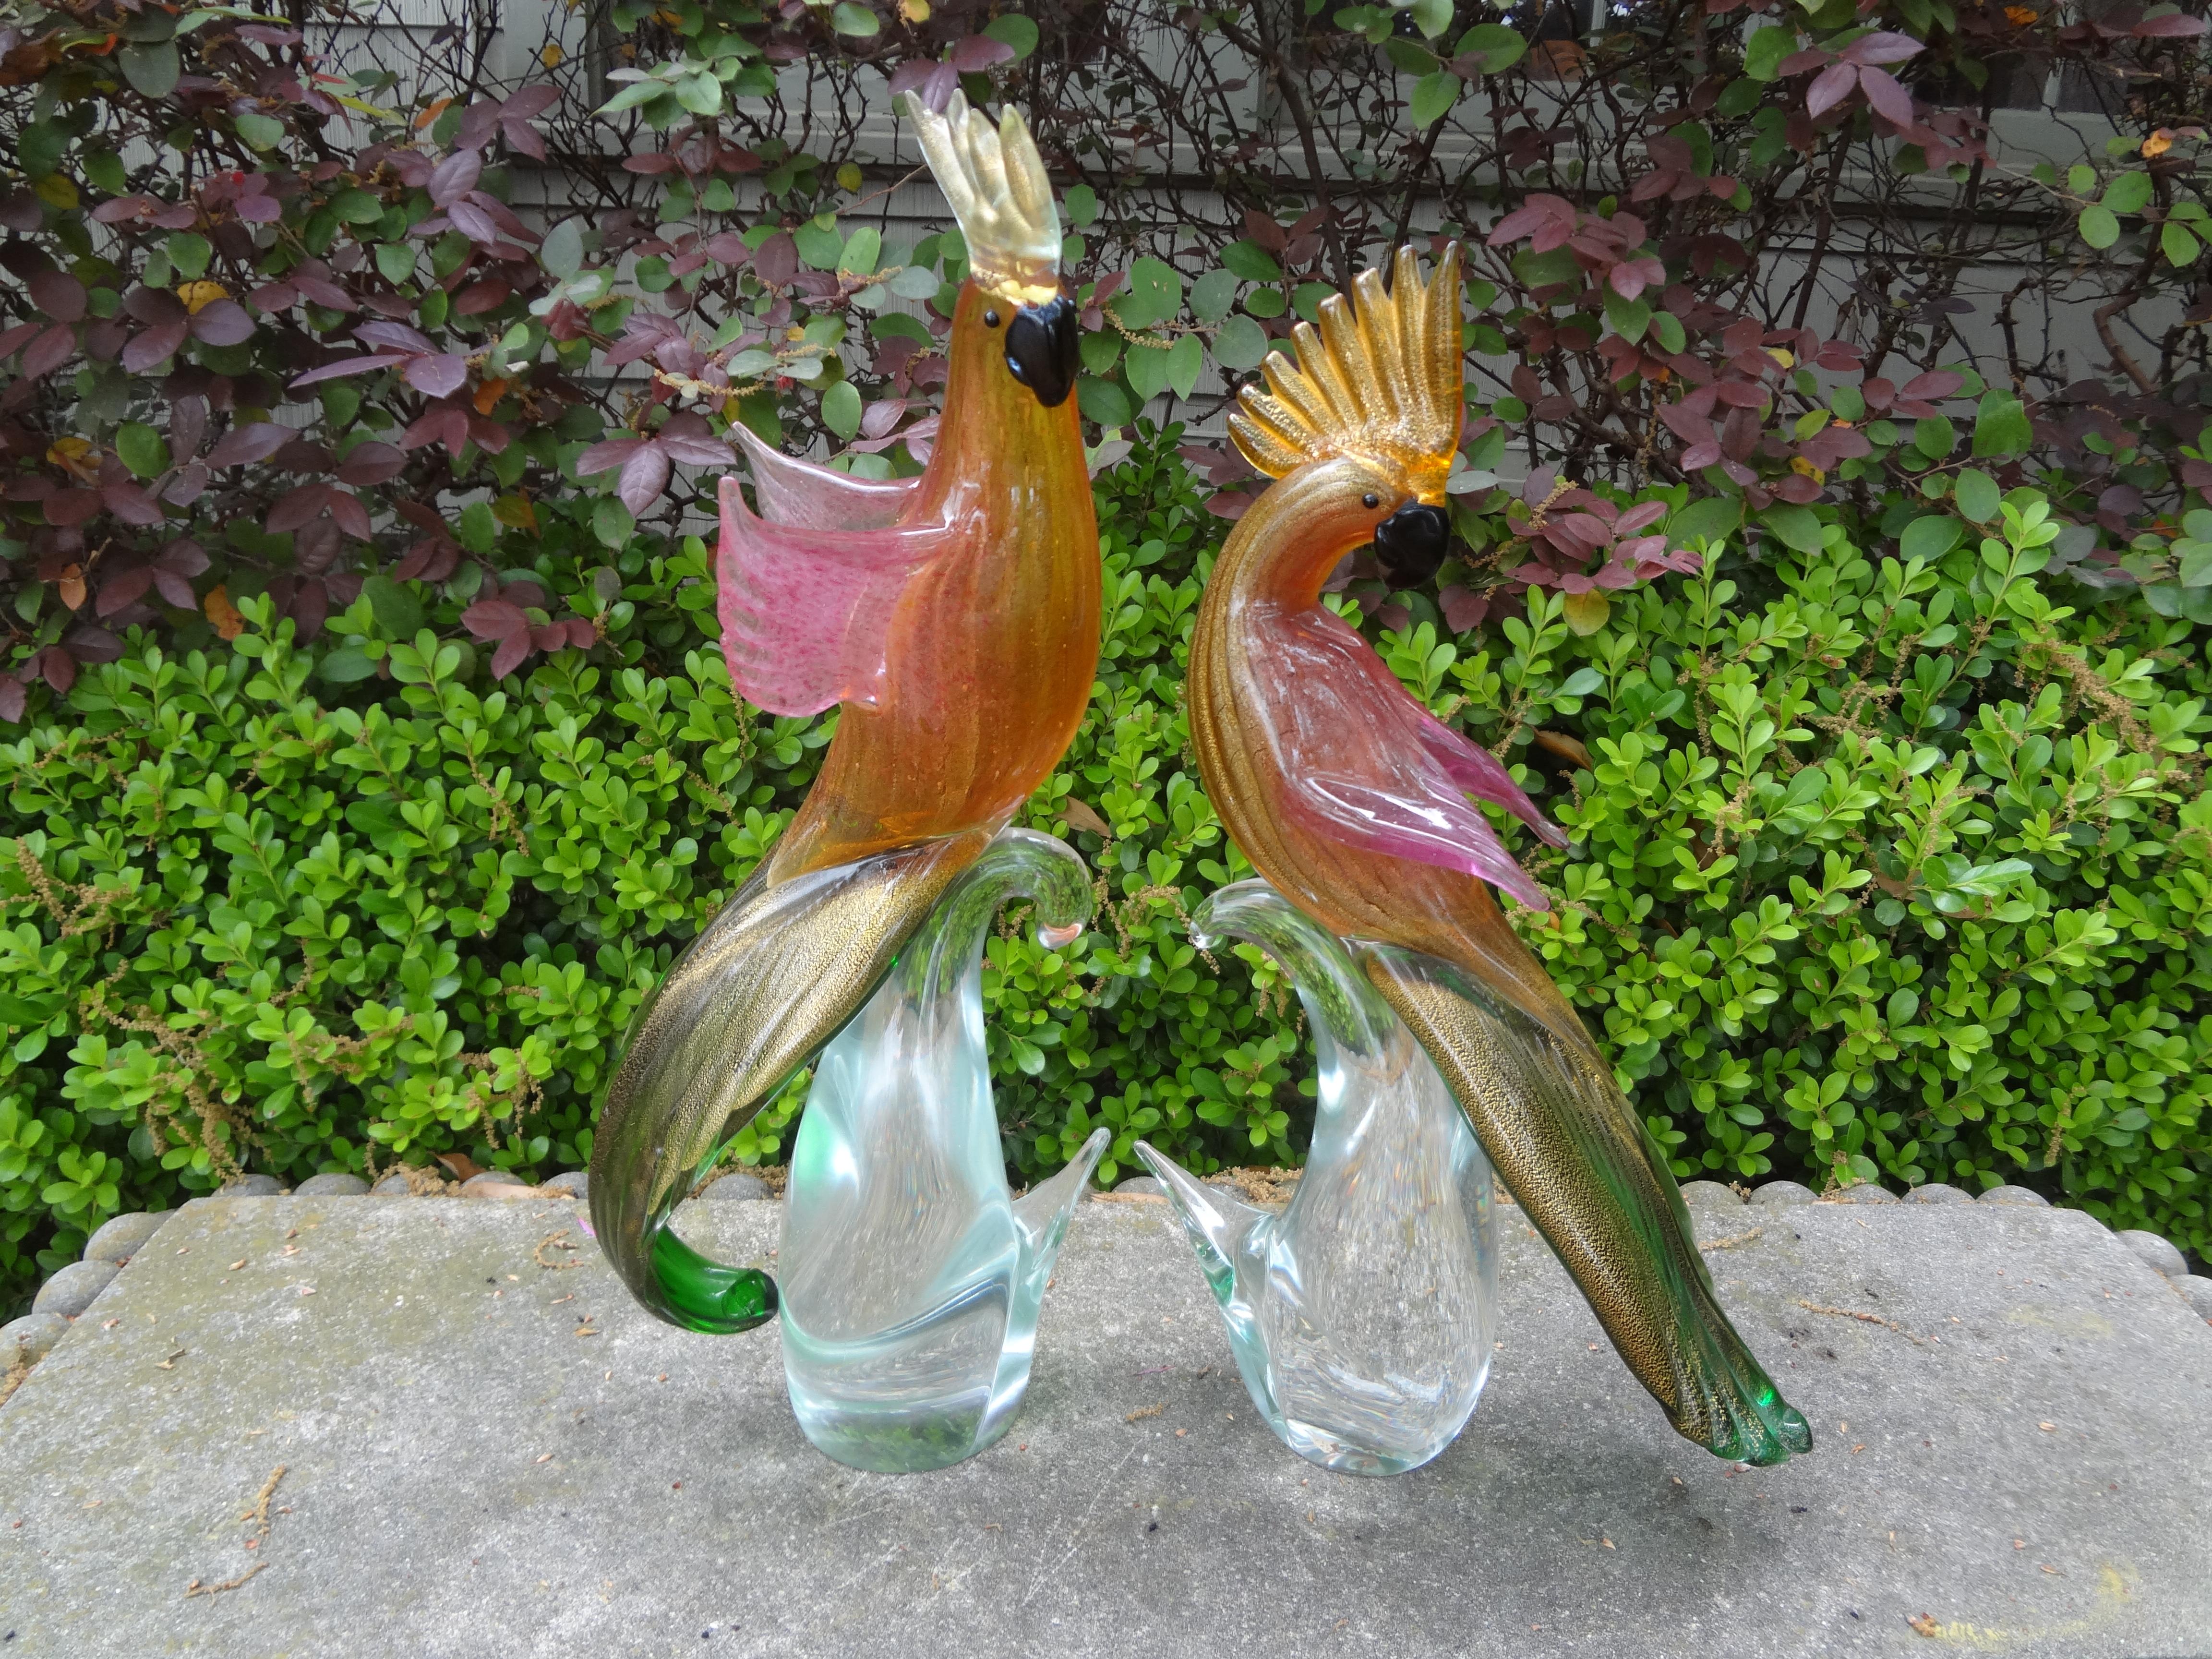 Large Pair Of Murano Glass Cockatiels Or Parrots.
This lovely pair of Murano glass cockatiels, parrots or birds were executed in several colors with internal gold inclusions with attention to detail.
Our beautiful Italian Murano glass sculptures are